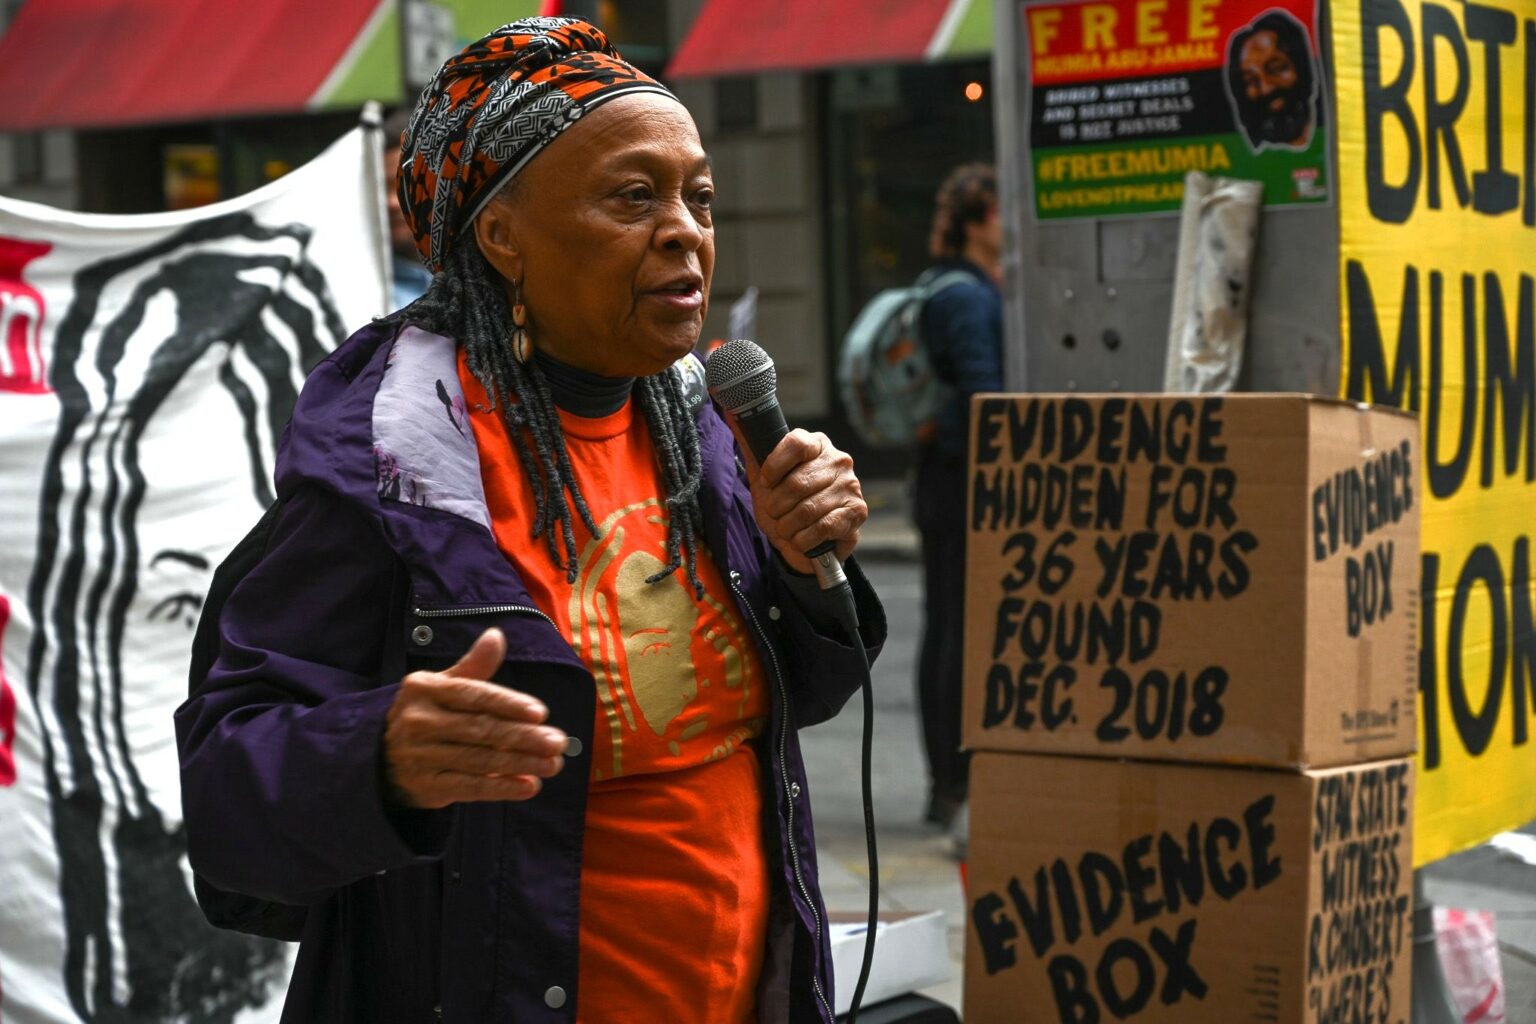 Pam Africa explains importance of the newly discovered evidence, outside court hearing in Philadelphia, Oct 26. Credit: Joe Piette